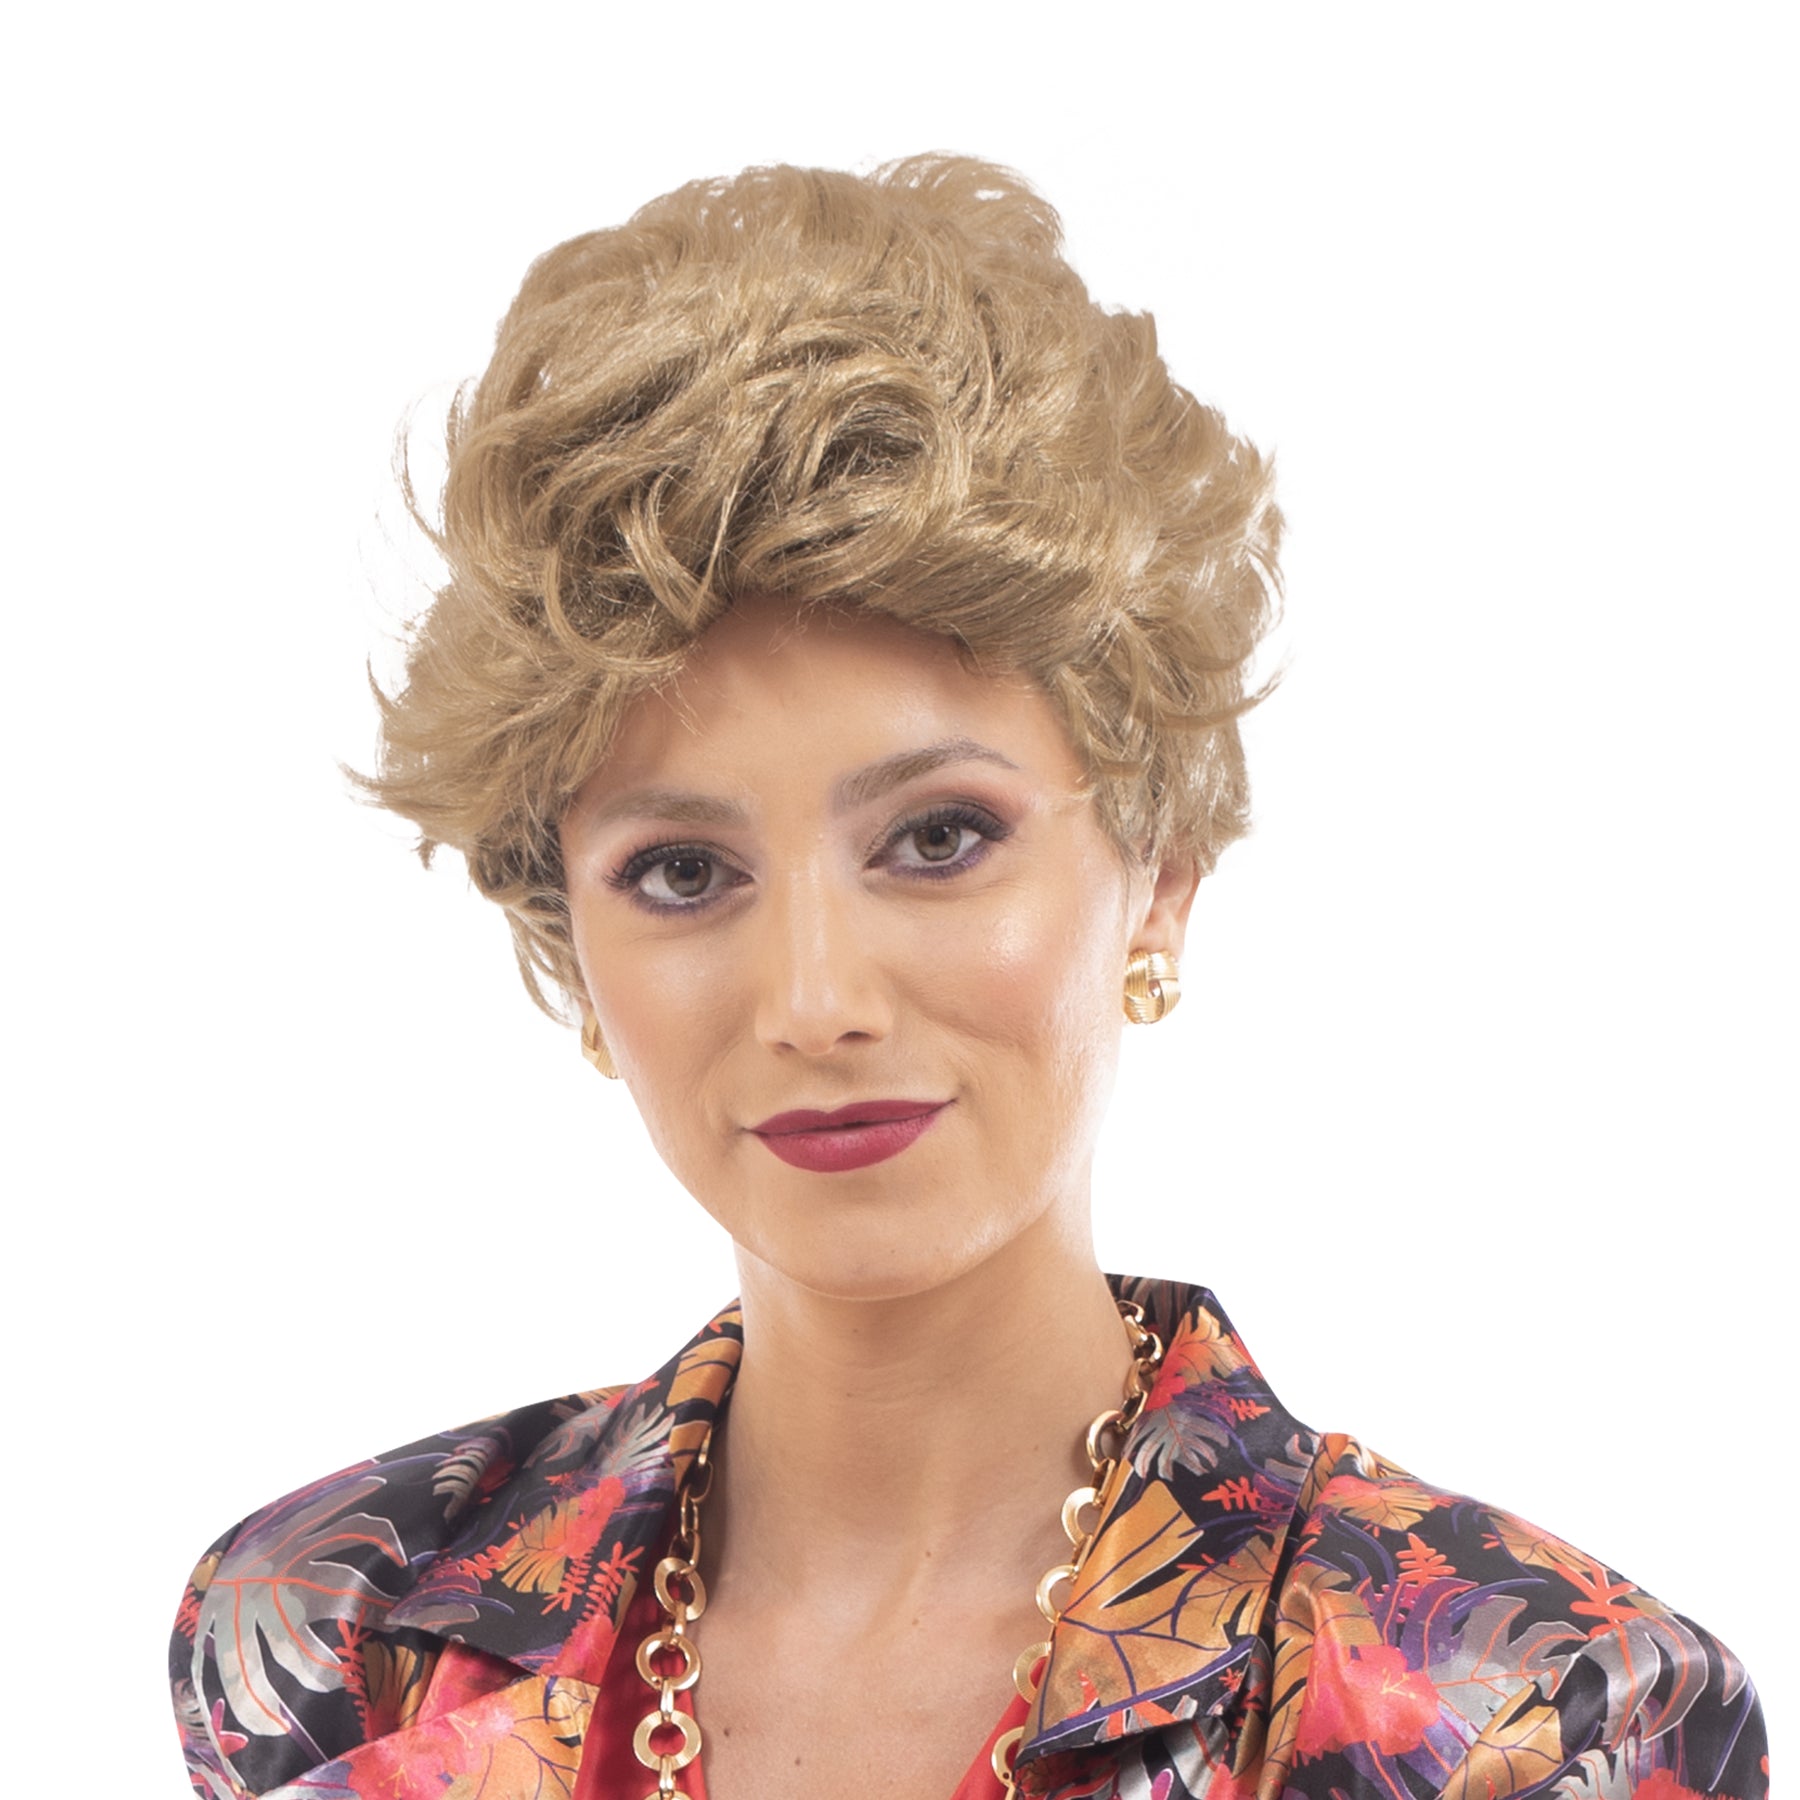 The Golden Girls Officially Licensed Blanche Costume Cosplay Wig